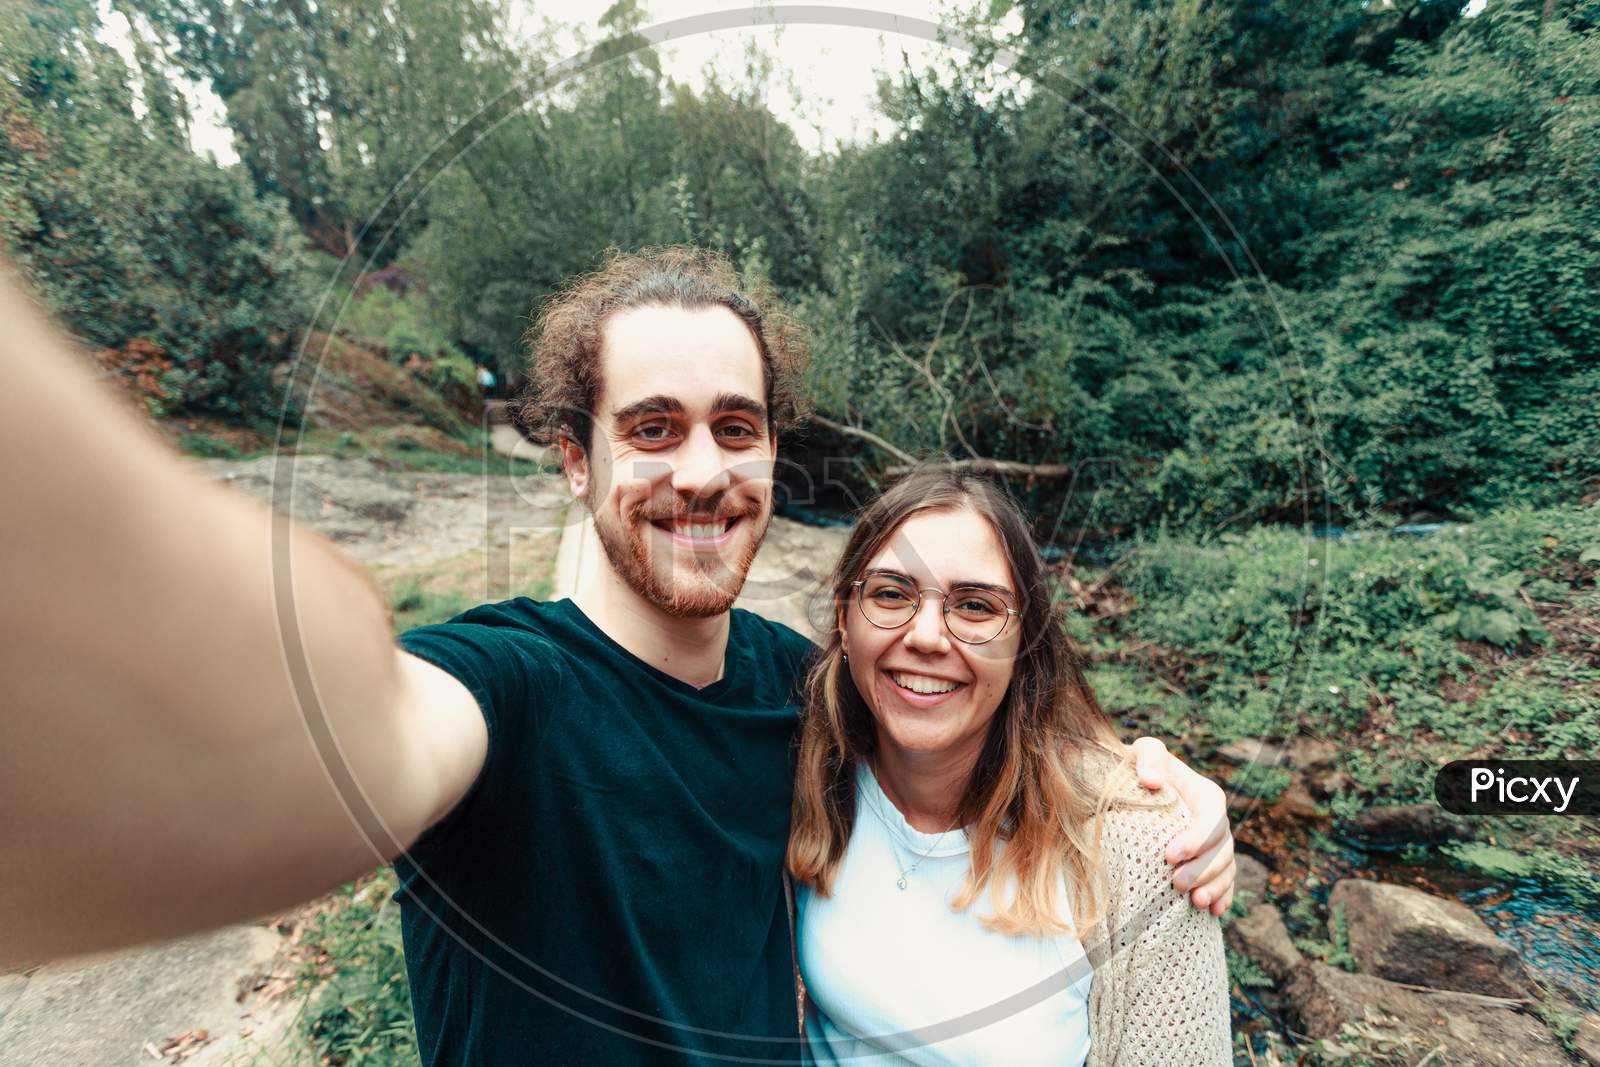 Young Couple Taking A Selfie In The Forest While Smiling